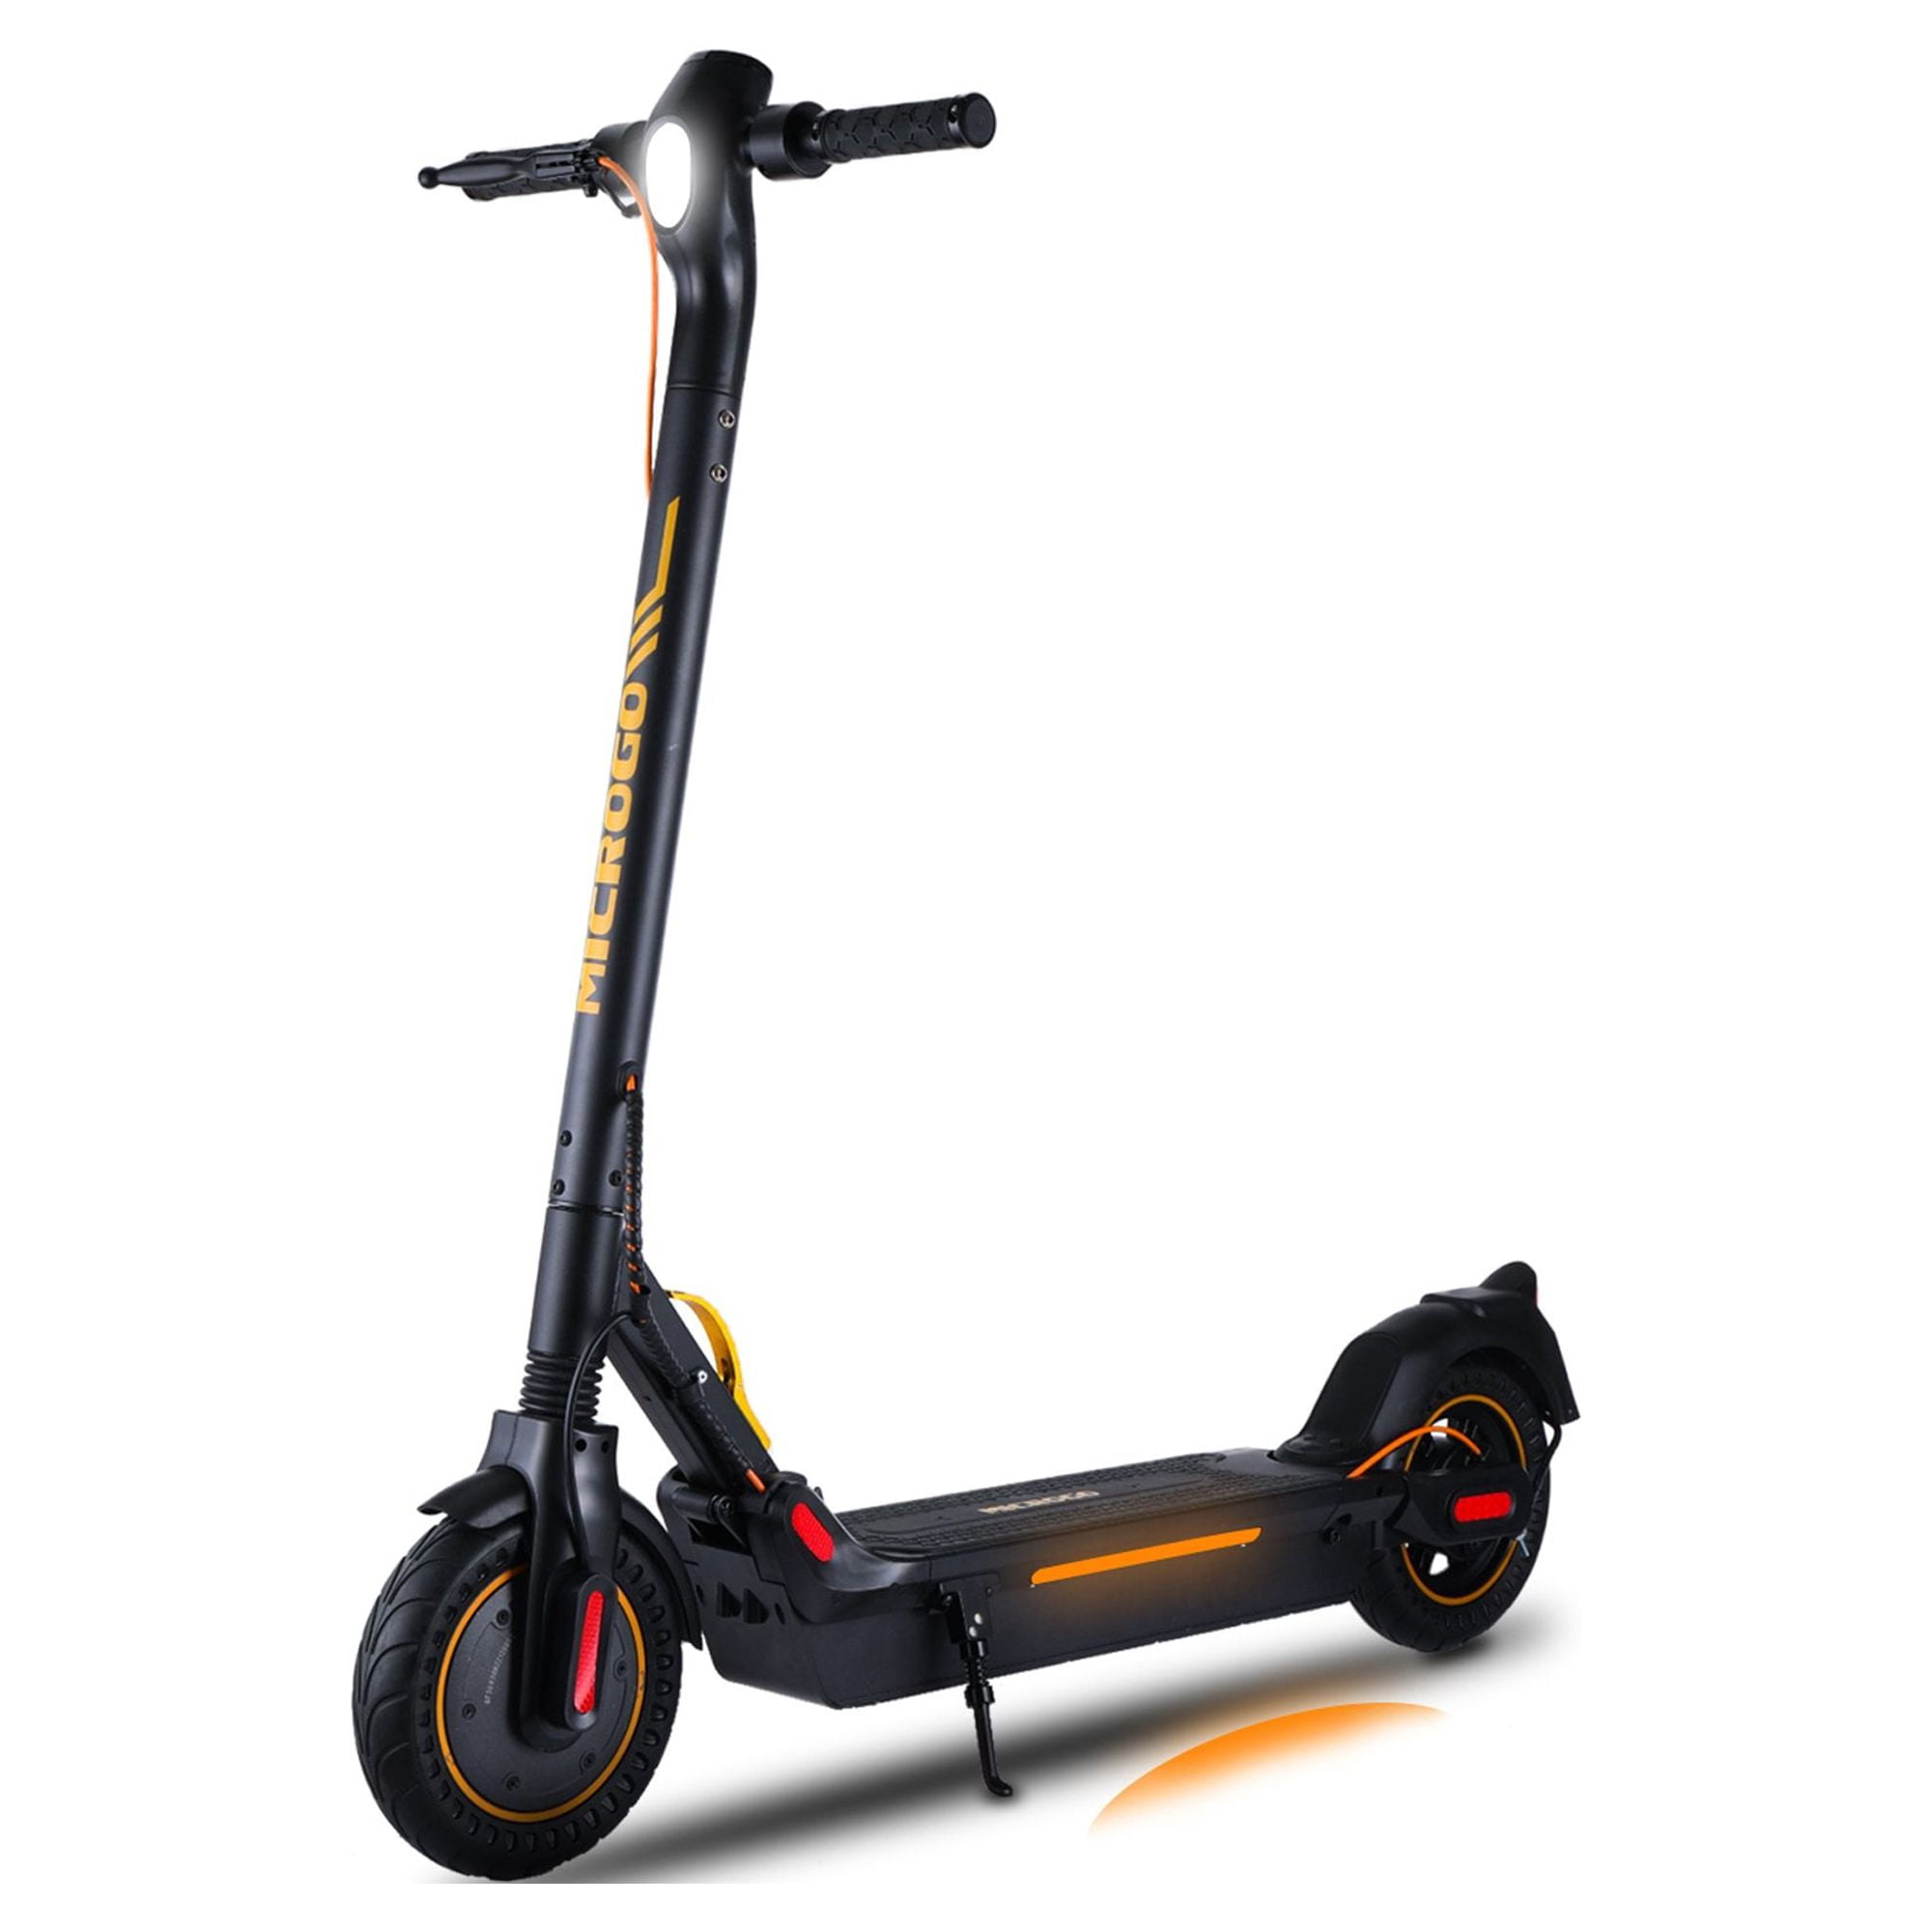 Hiboy S2 Max Refurbished Electric Scooter